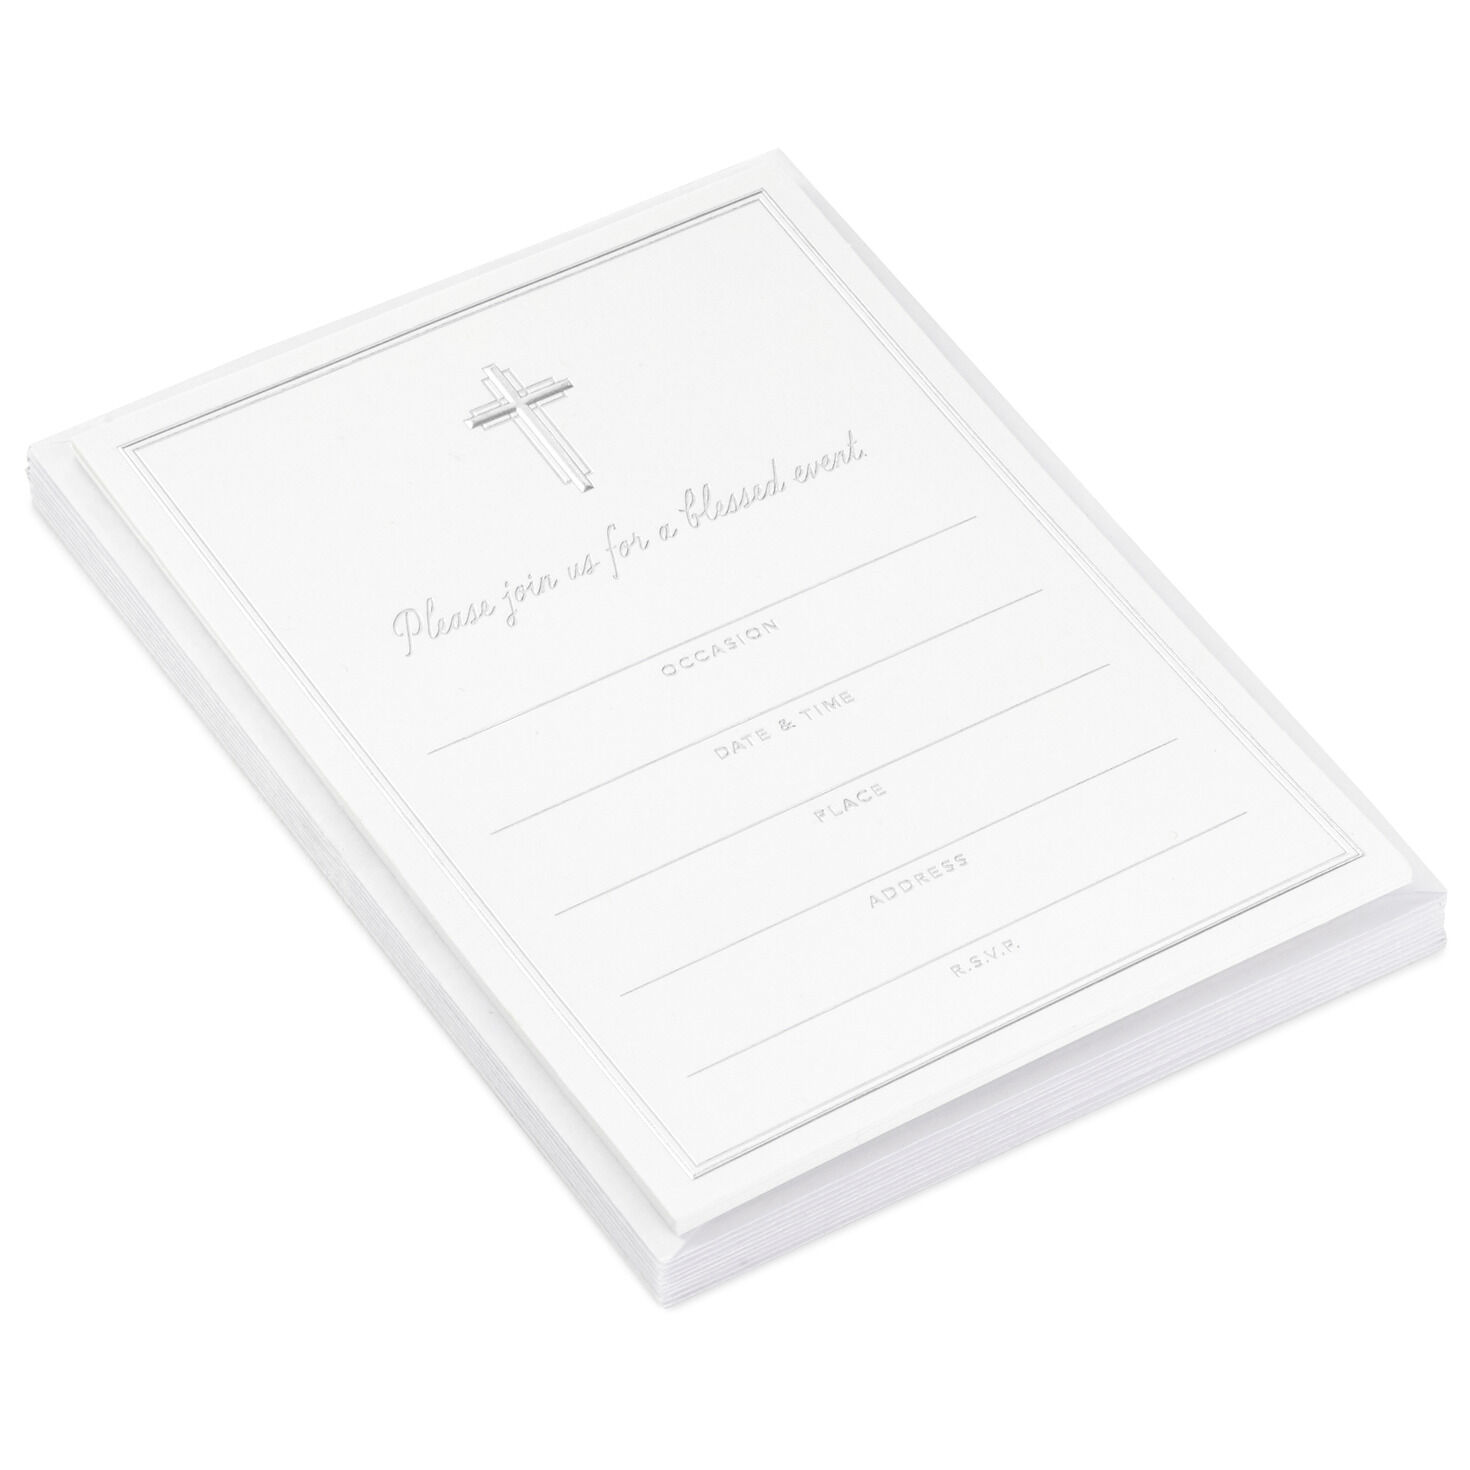 Silver Cross Blessed Event Invitations, Pack of 10 for only USD 5.99 | Hallmark